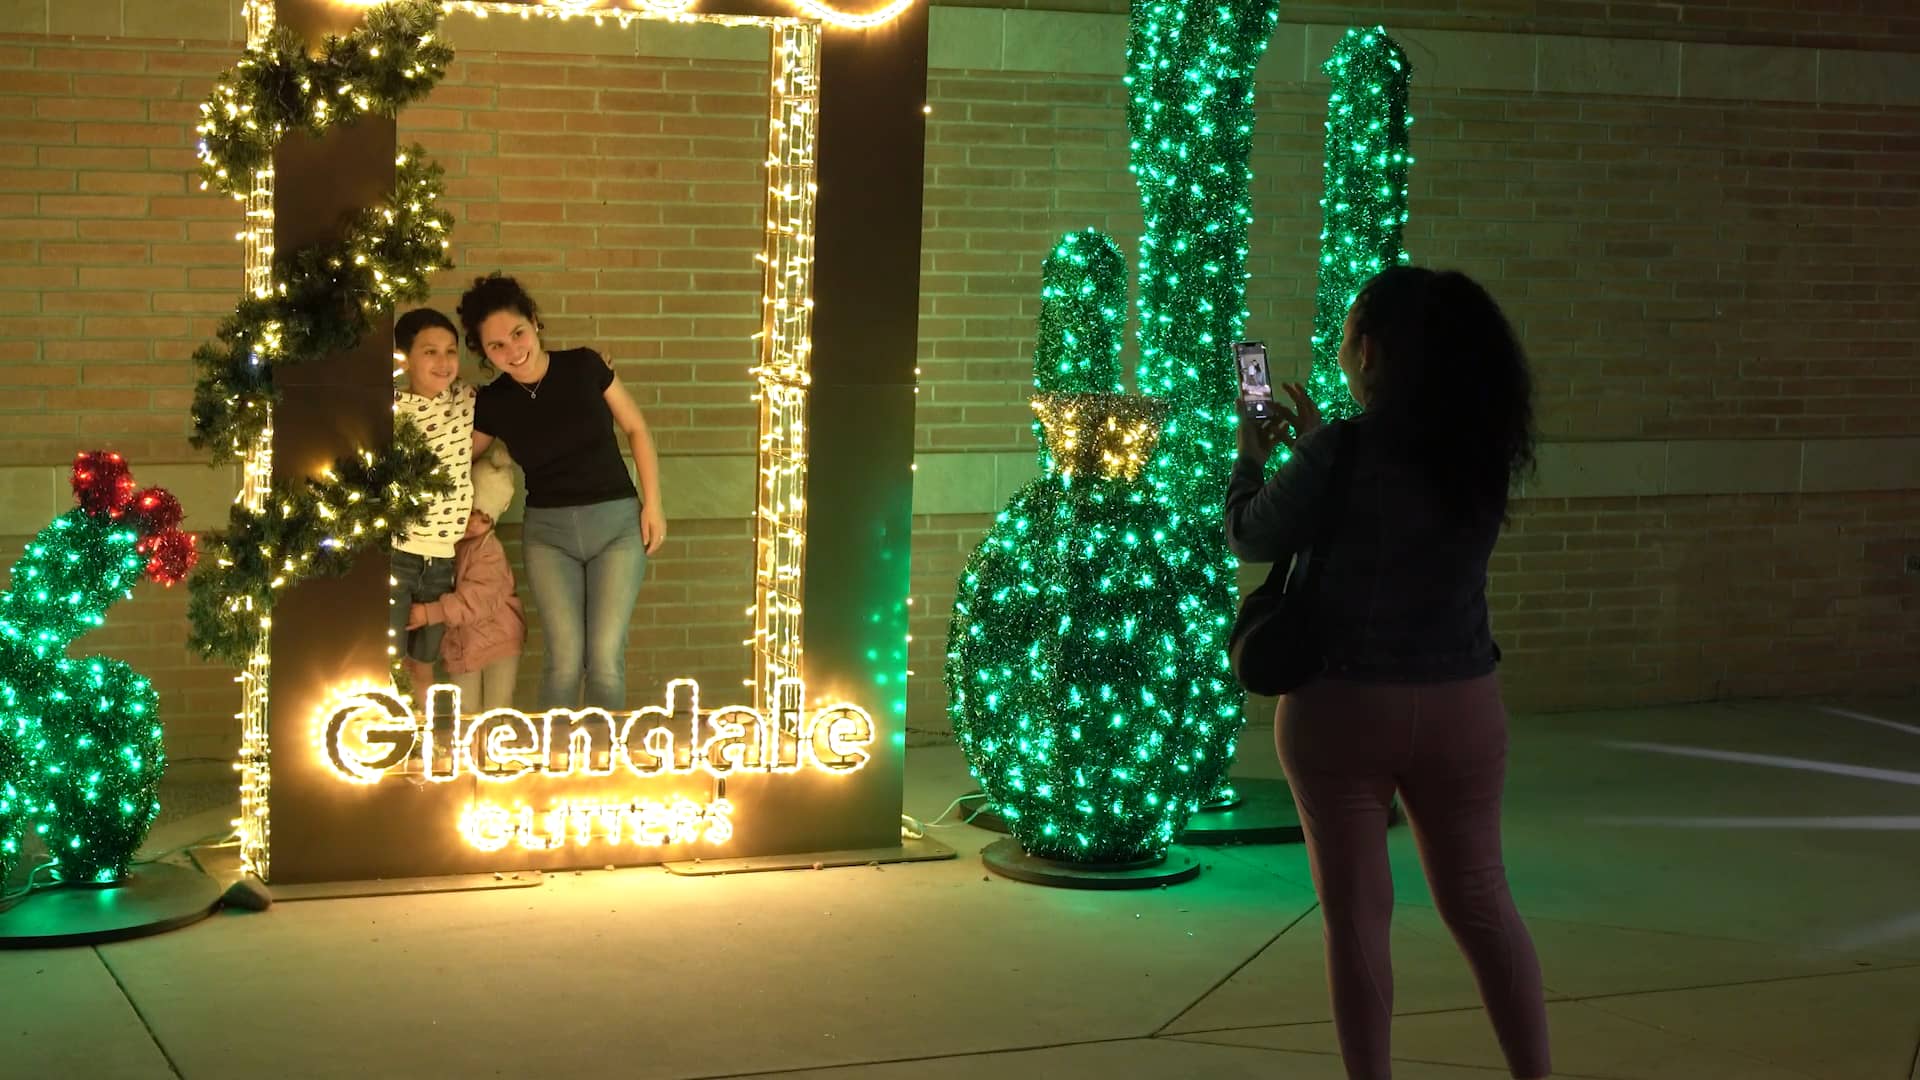 Hometown Christmas Parade Preview on Vimeo